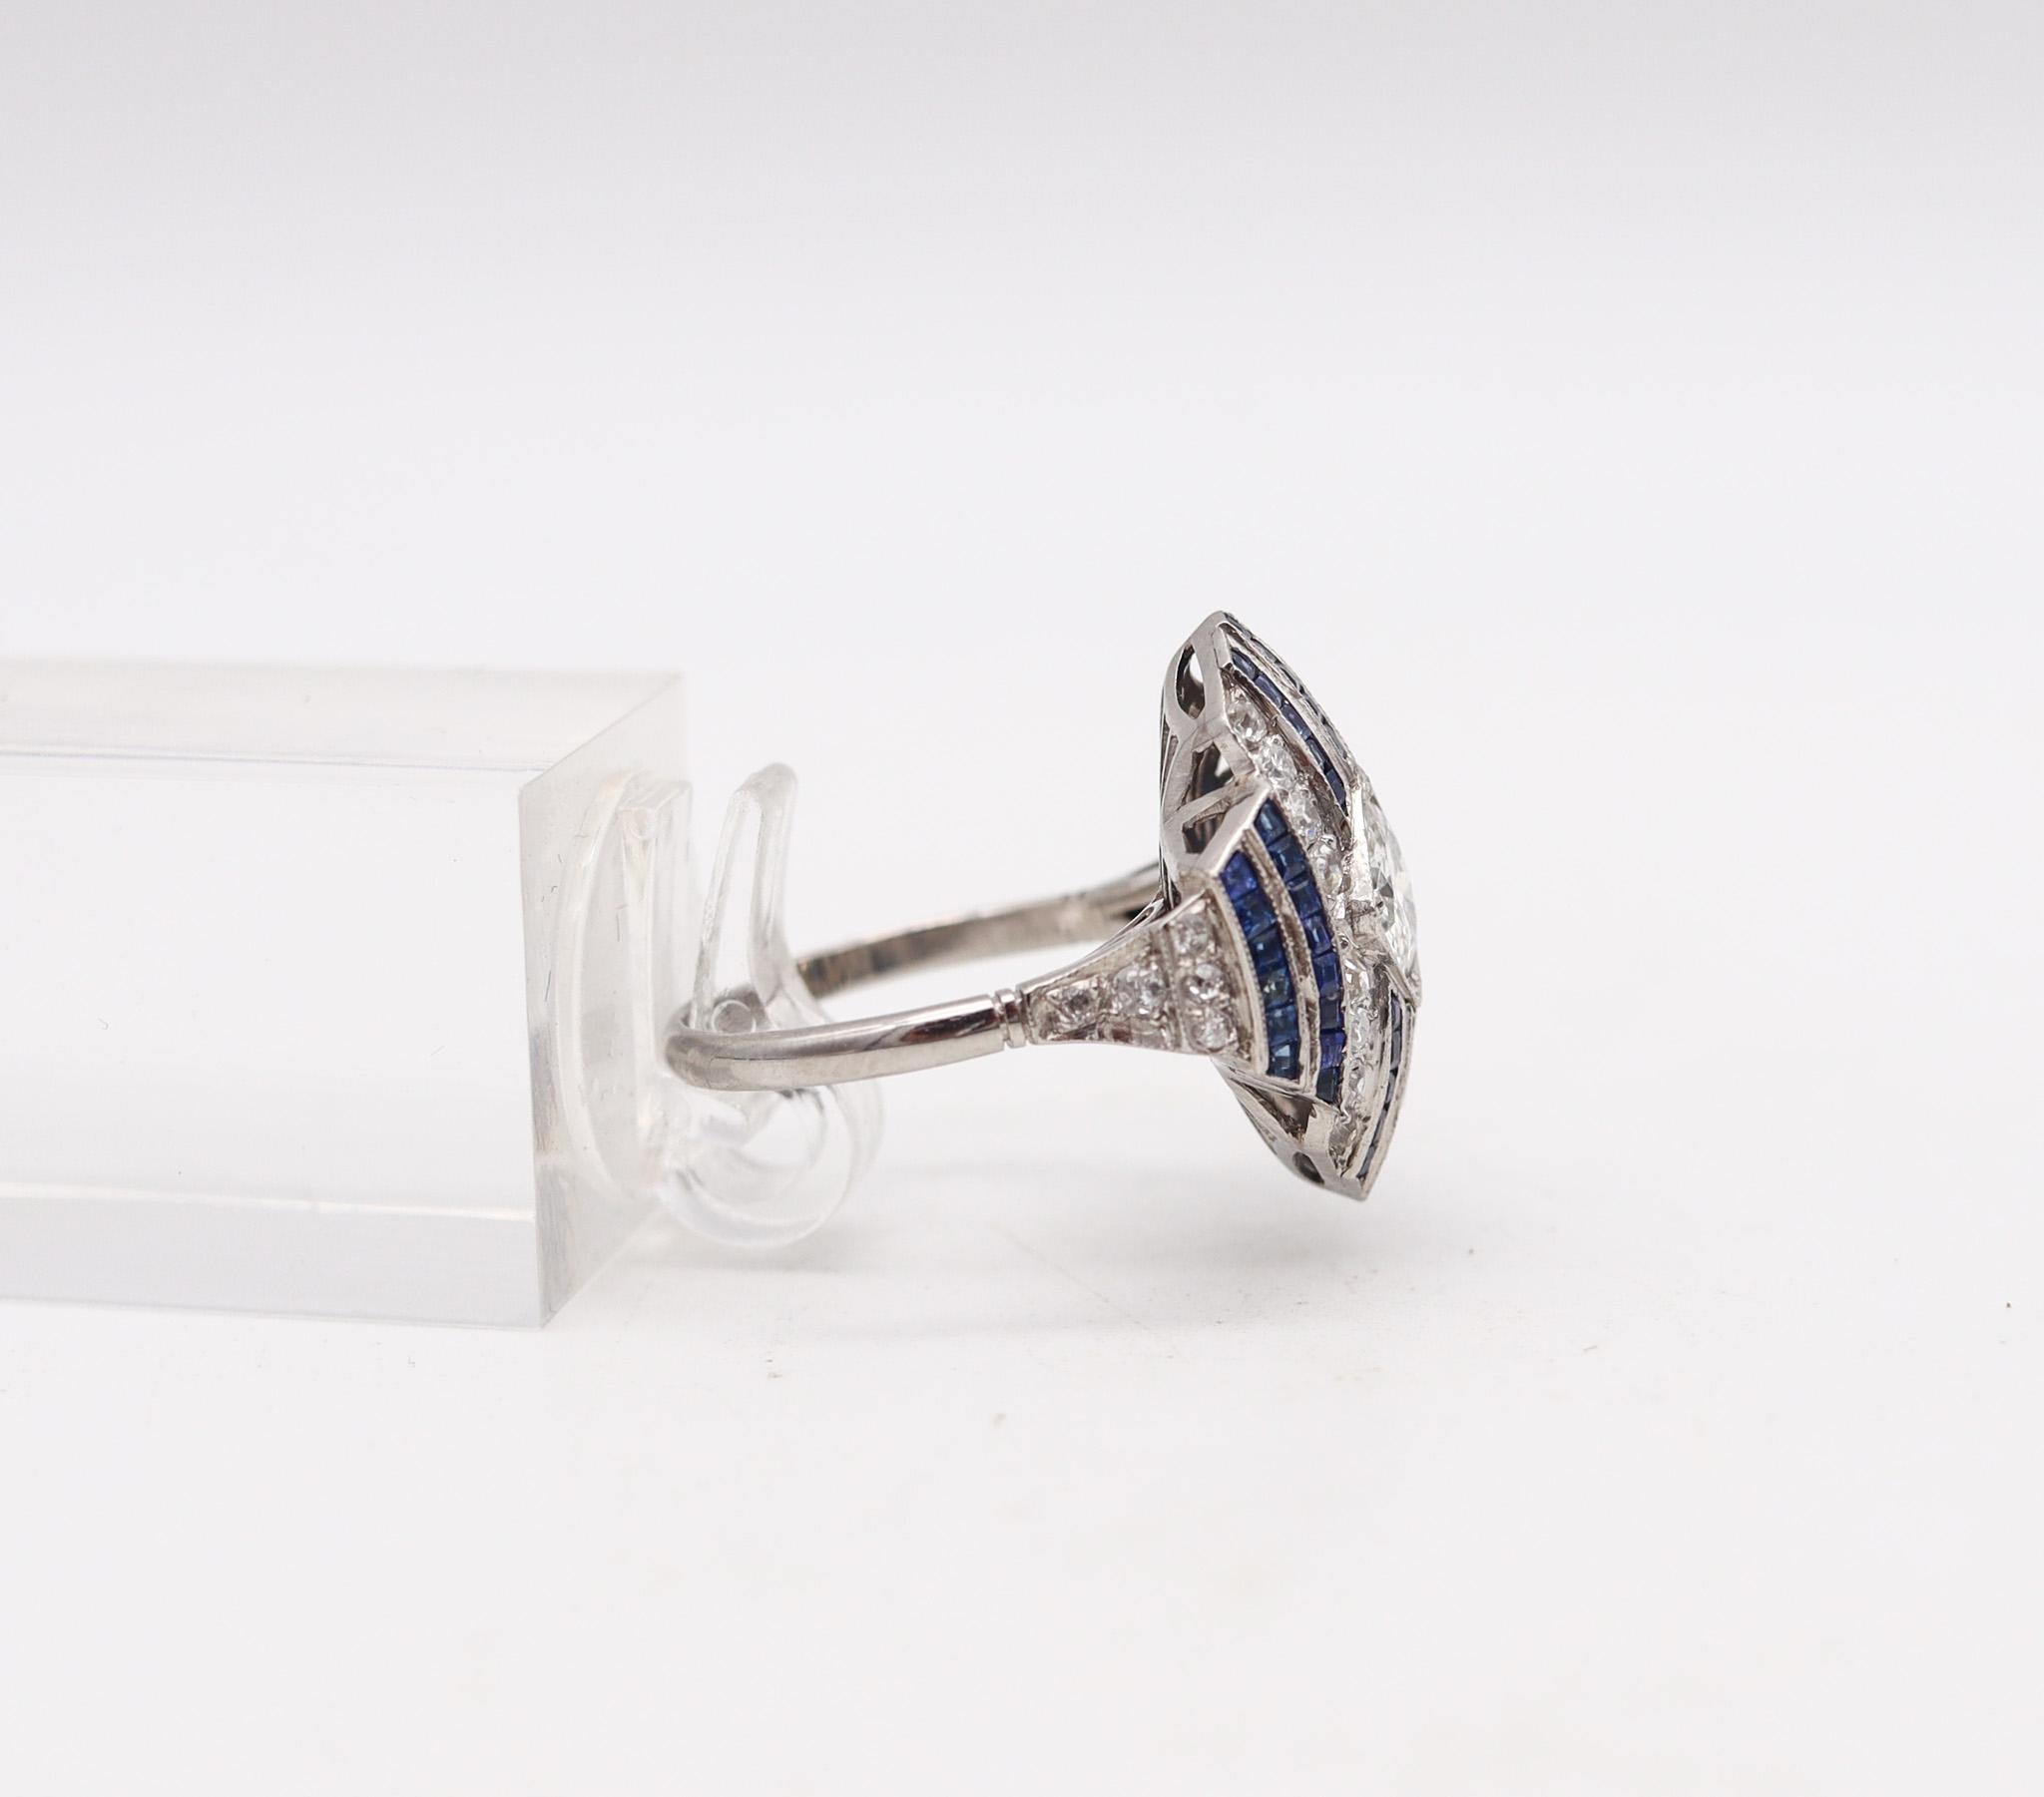 Mixed Cut Art Deco 1930 Geometric Ring In Platinum With 3.67 Ctw In Diamonds And Sapphires For Sale